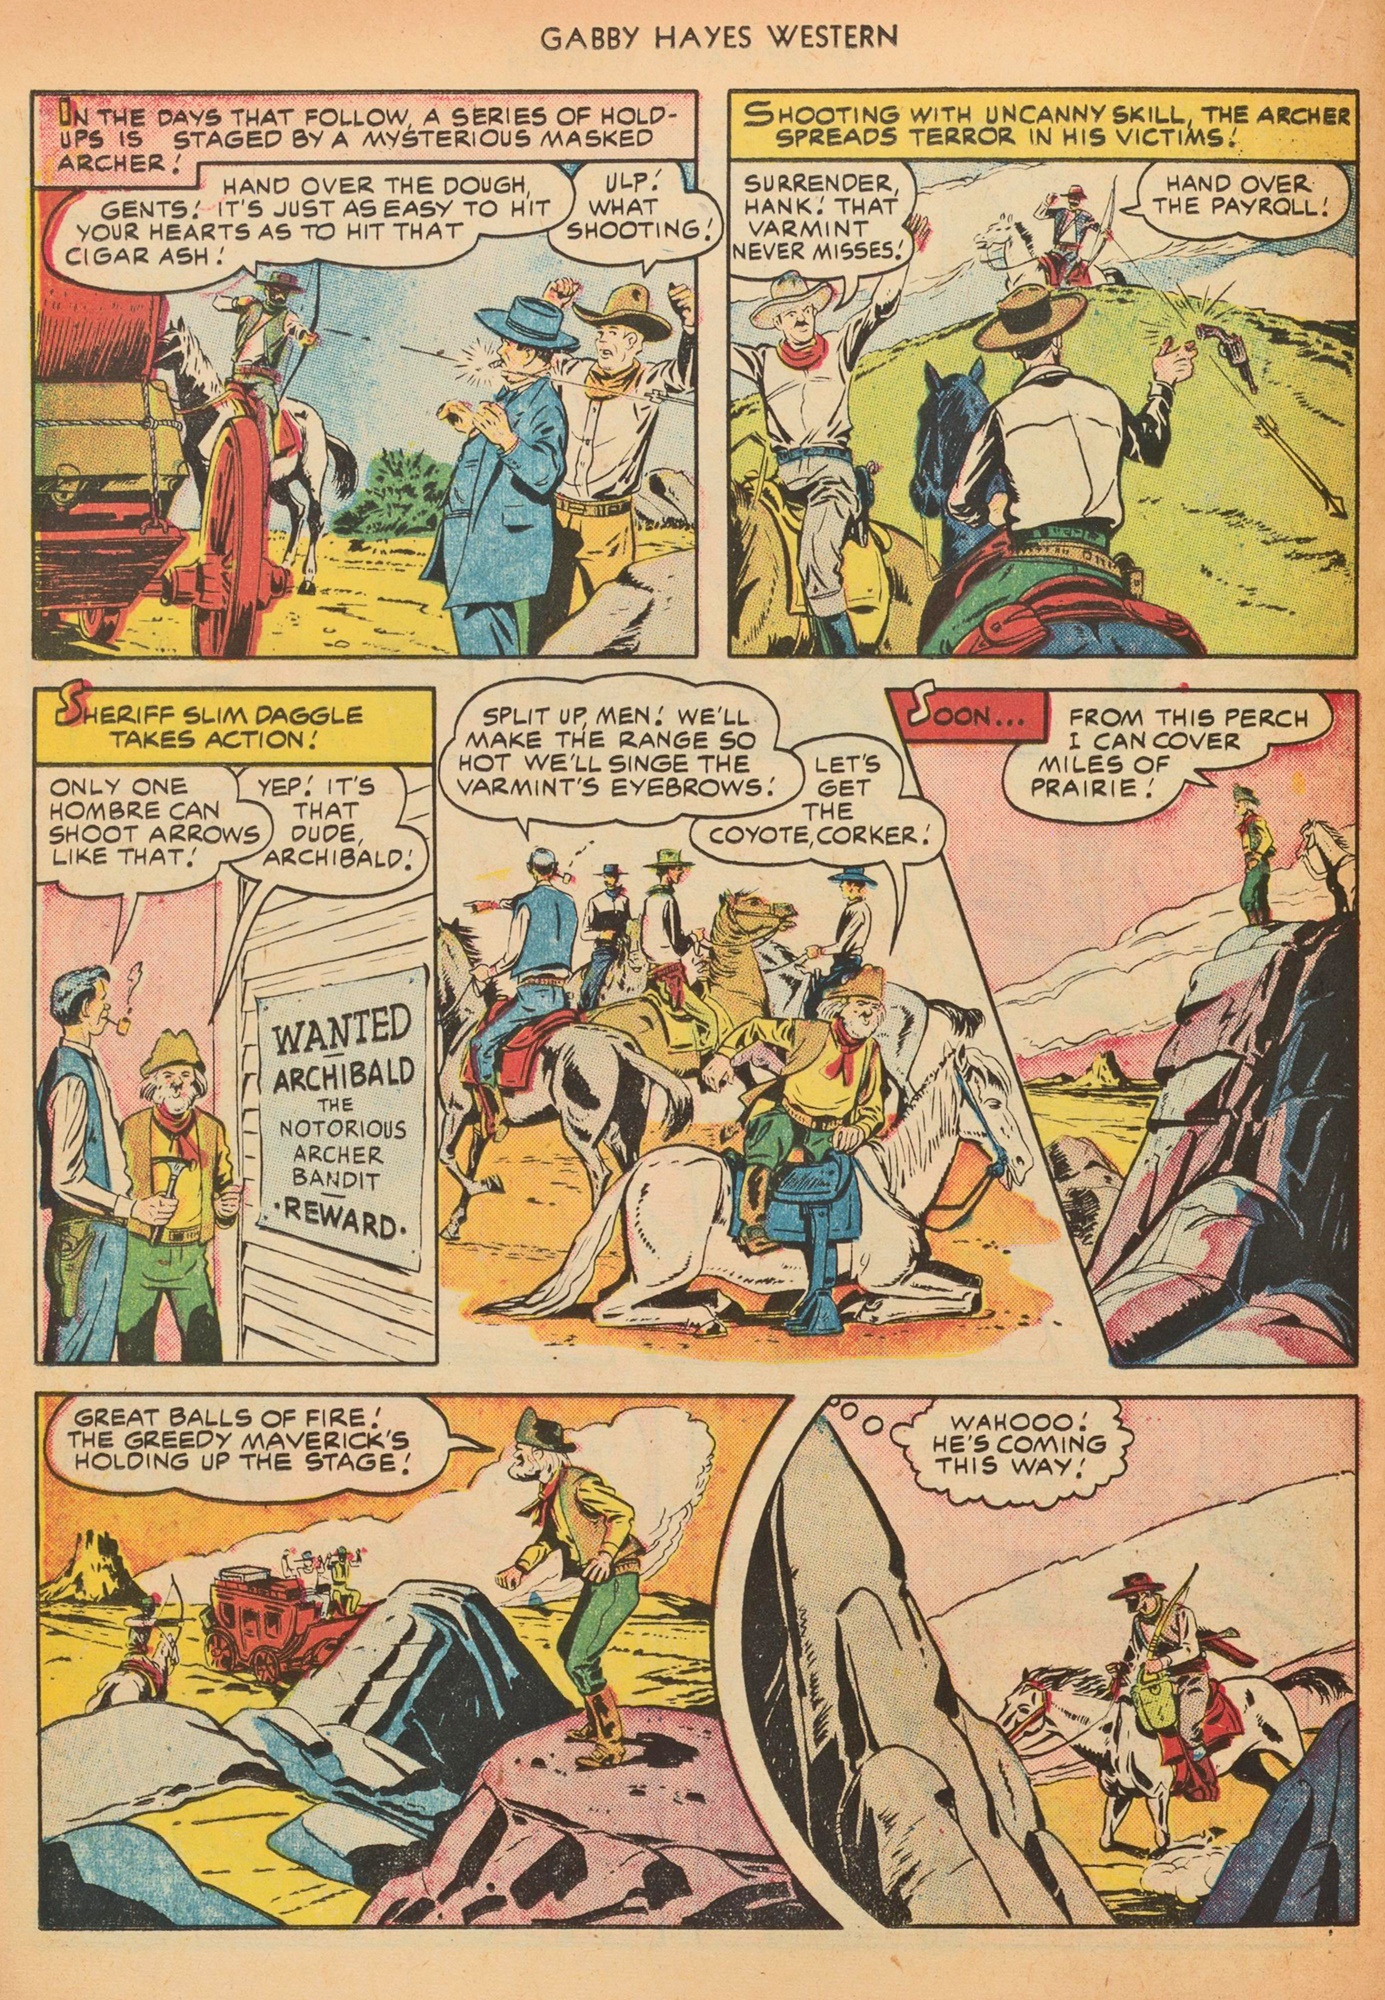 Read online Gabby Hayes Western comic -  Issue #34 - 20